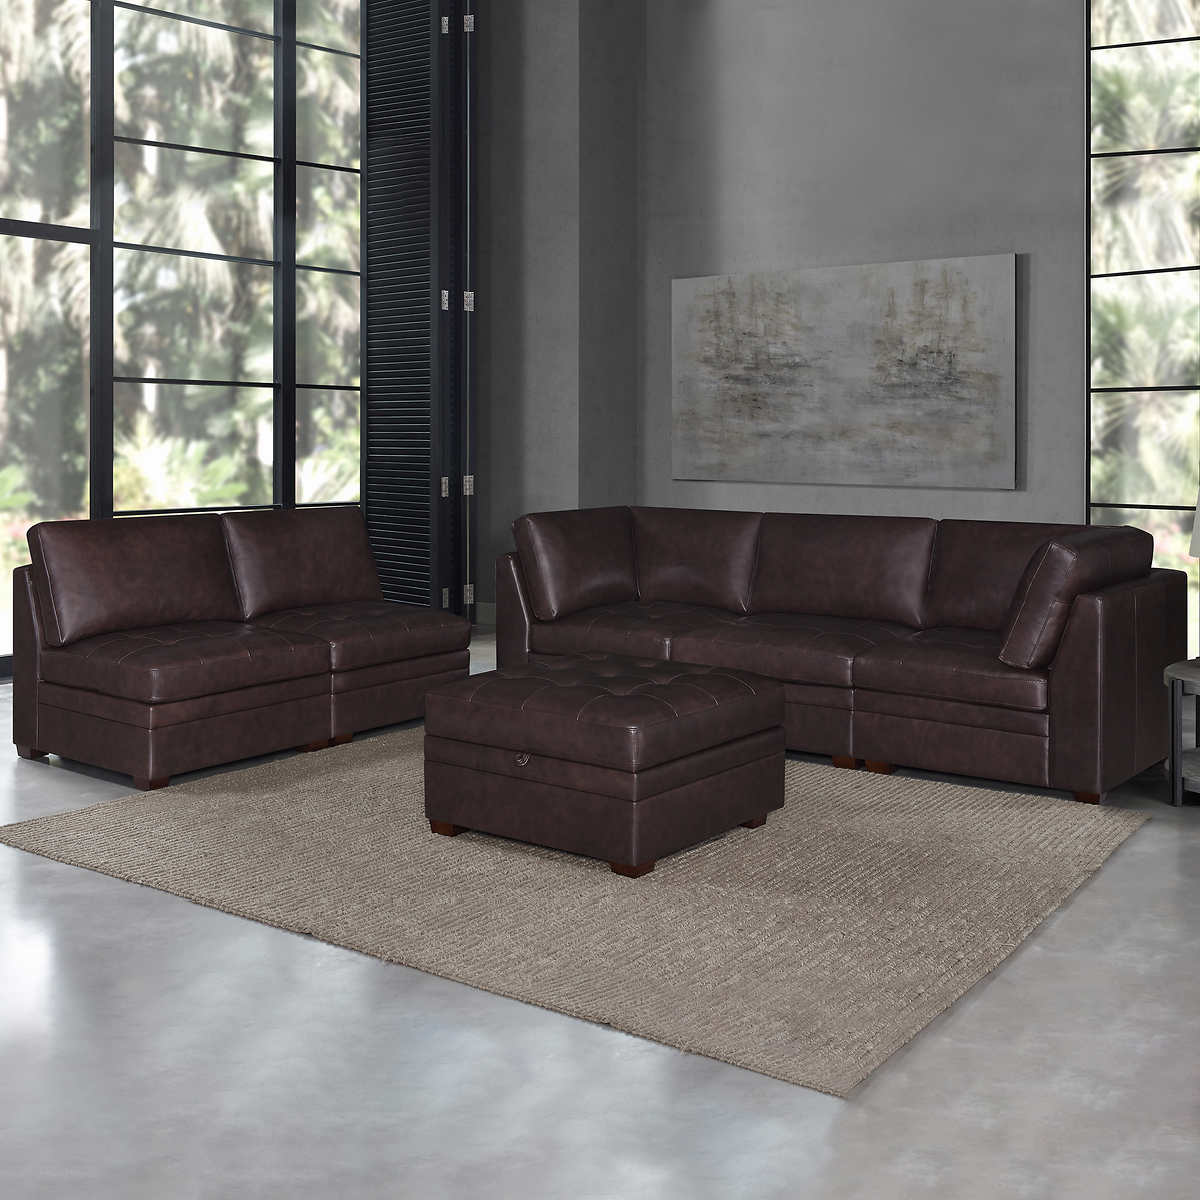 Thomasville Tisdale Leather Sectional, Thomasville Leather Sectional